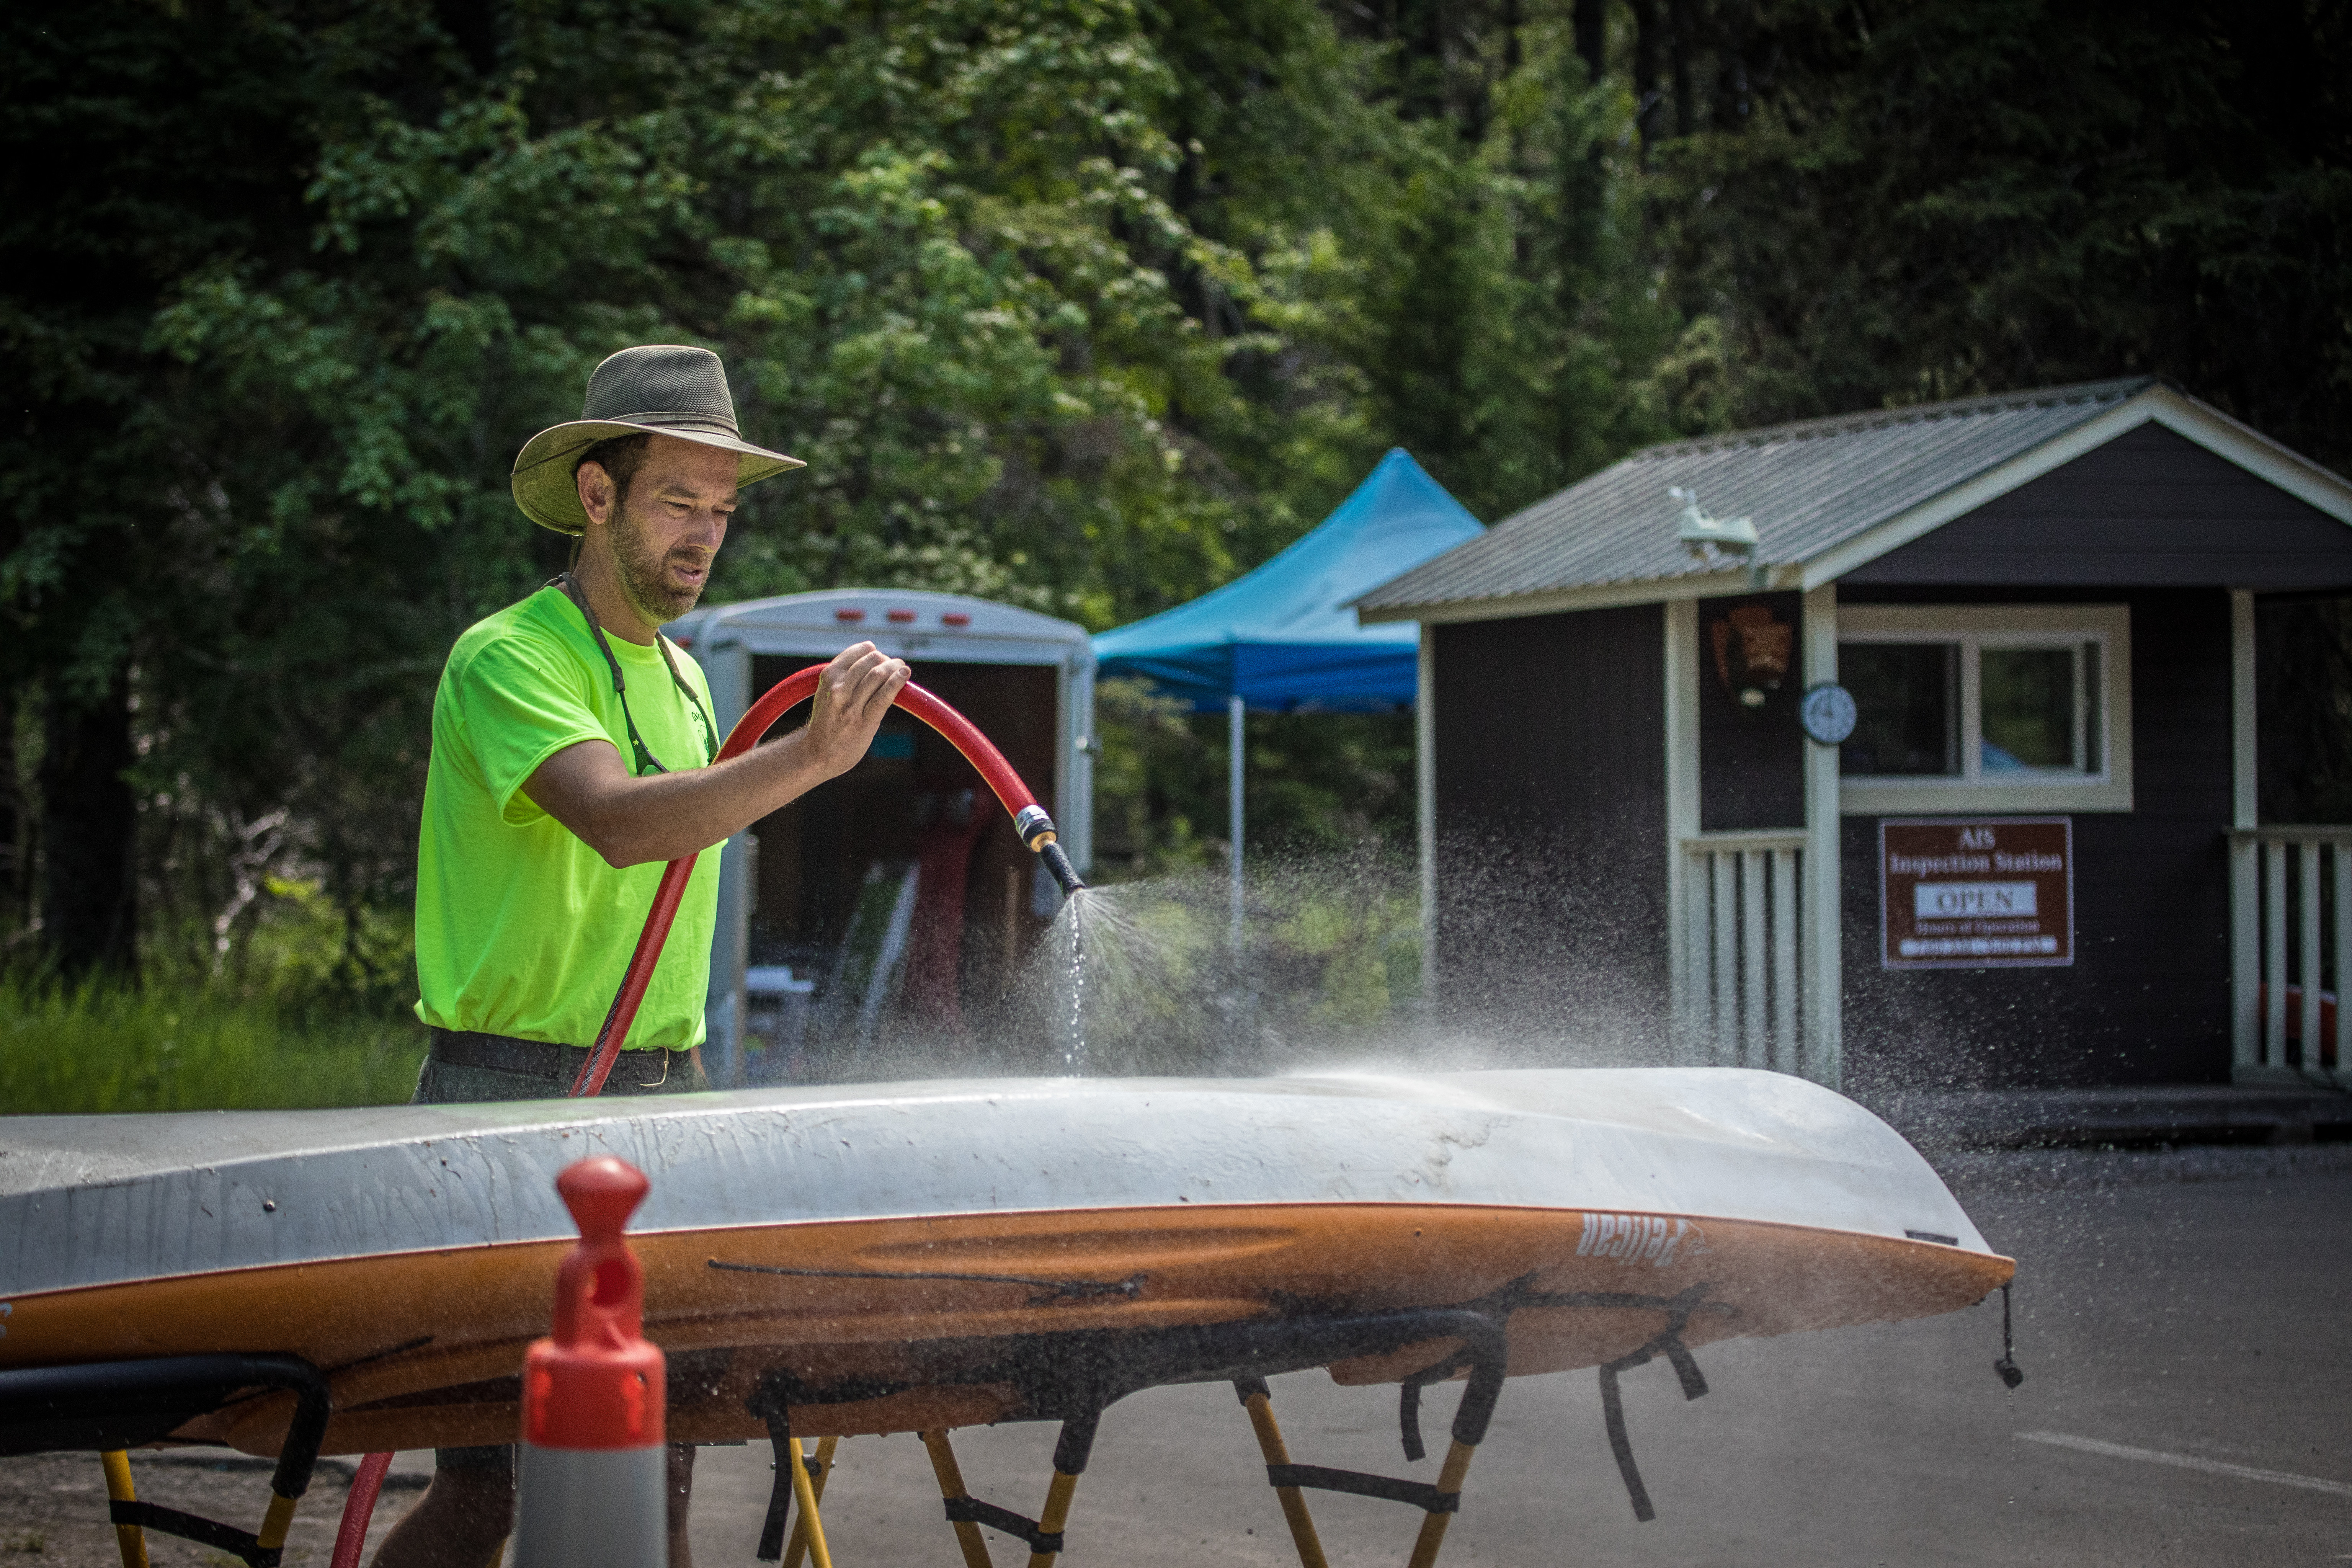 A man using a hose to wash a kayak